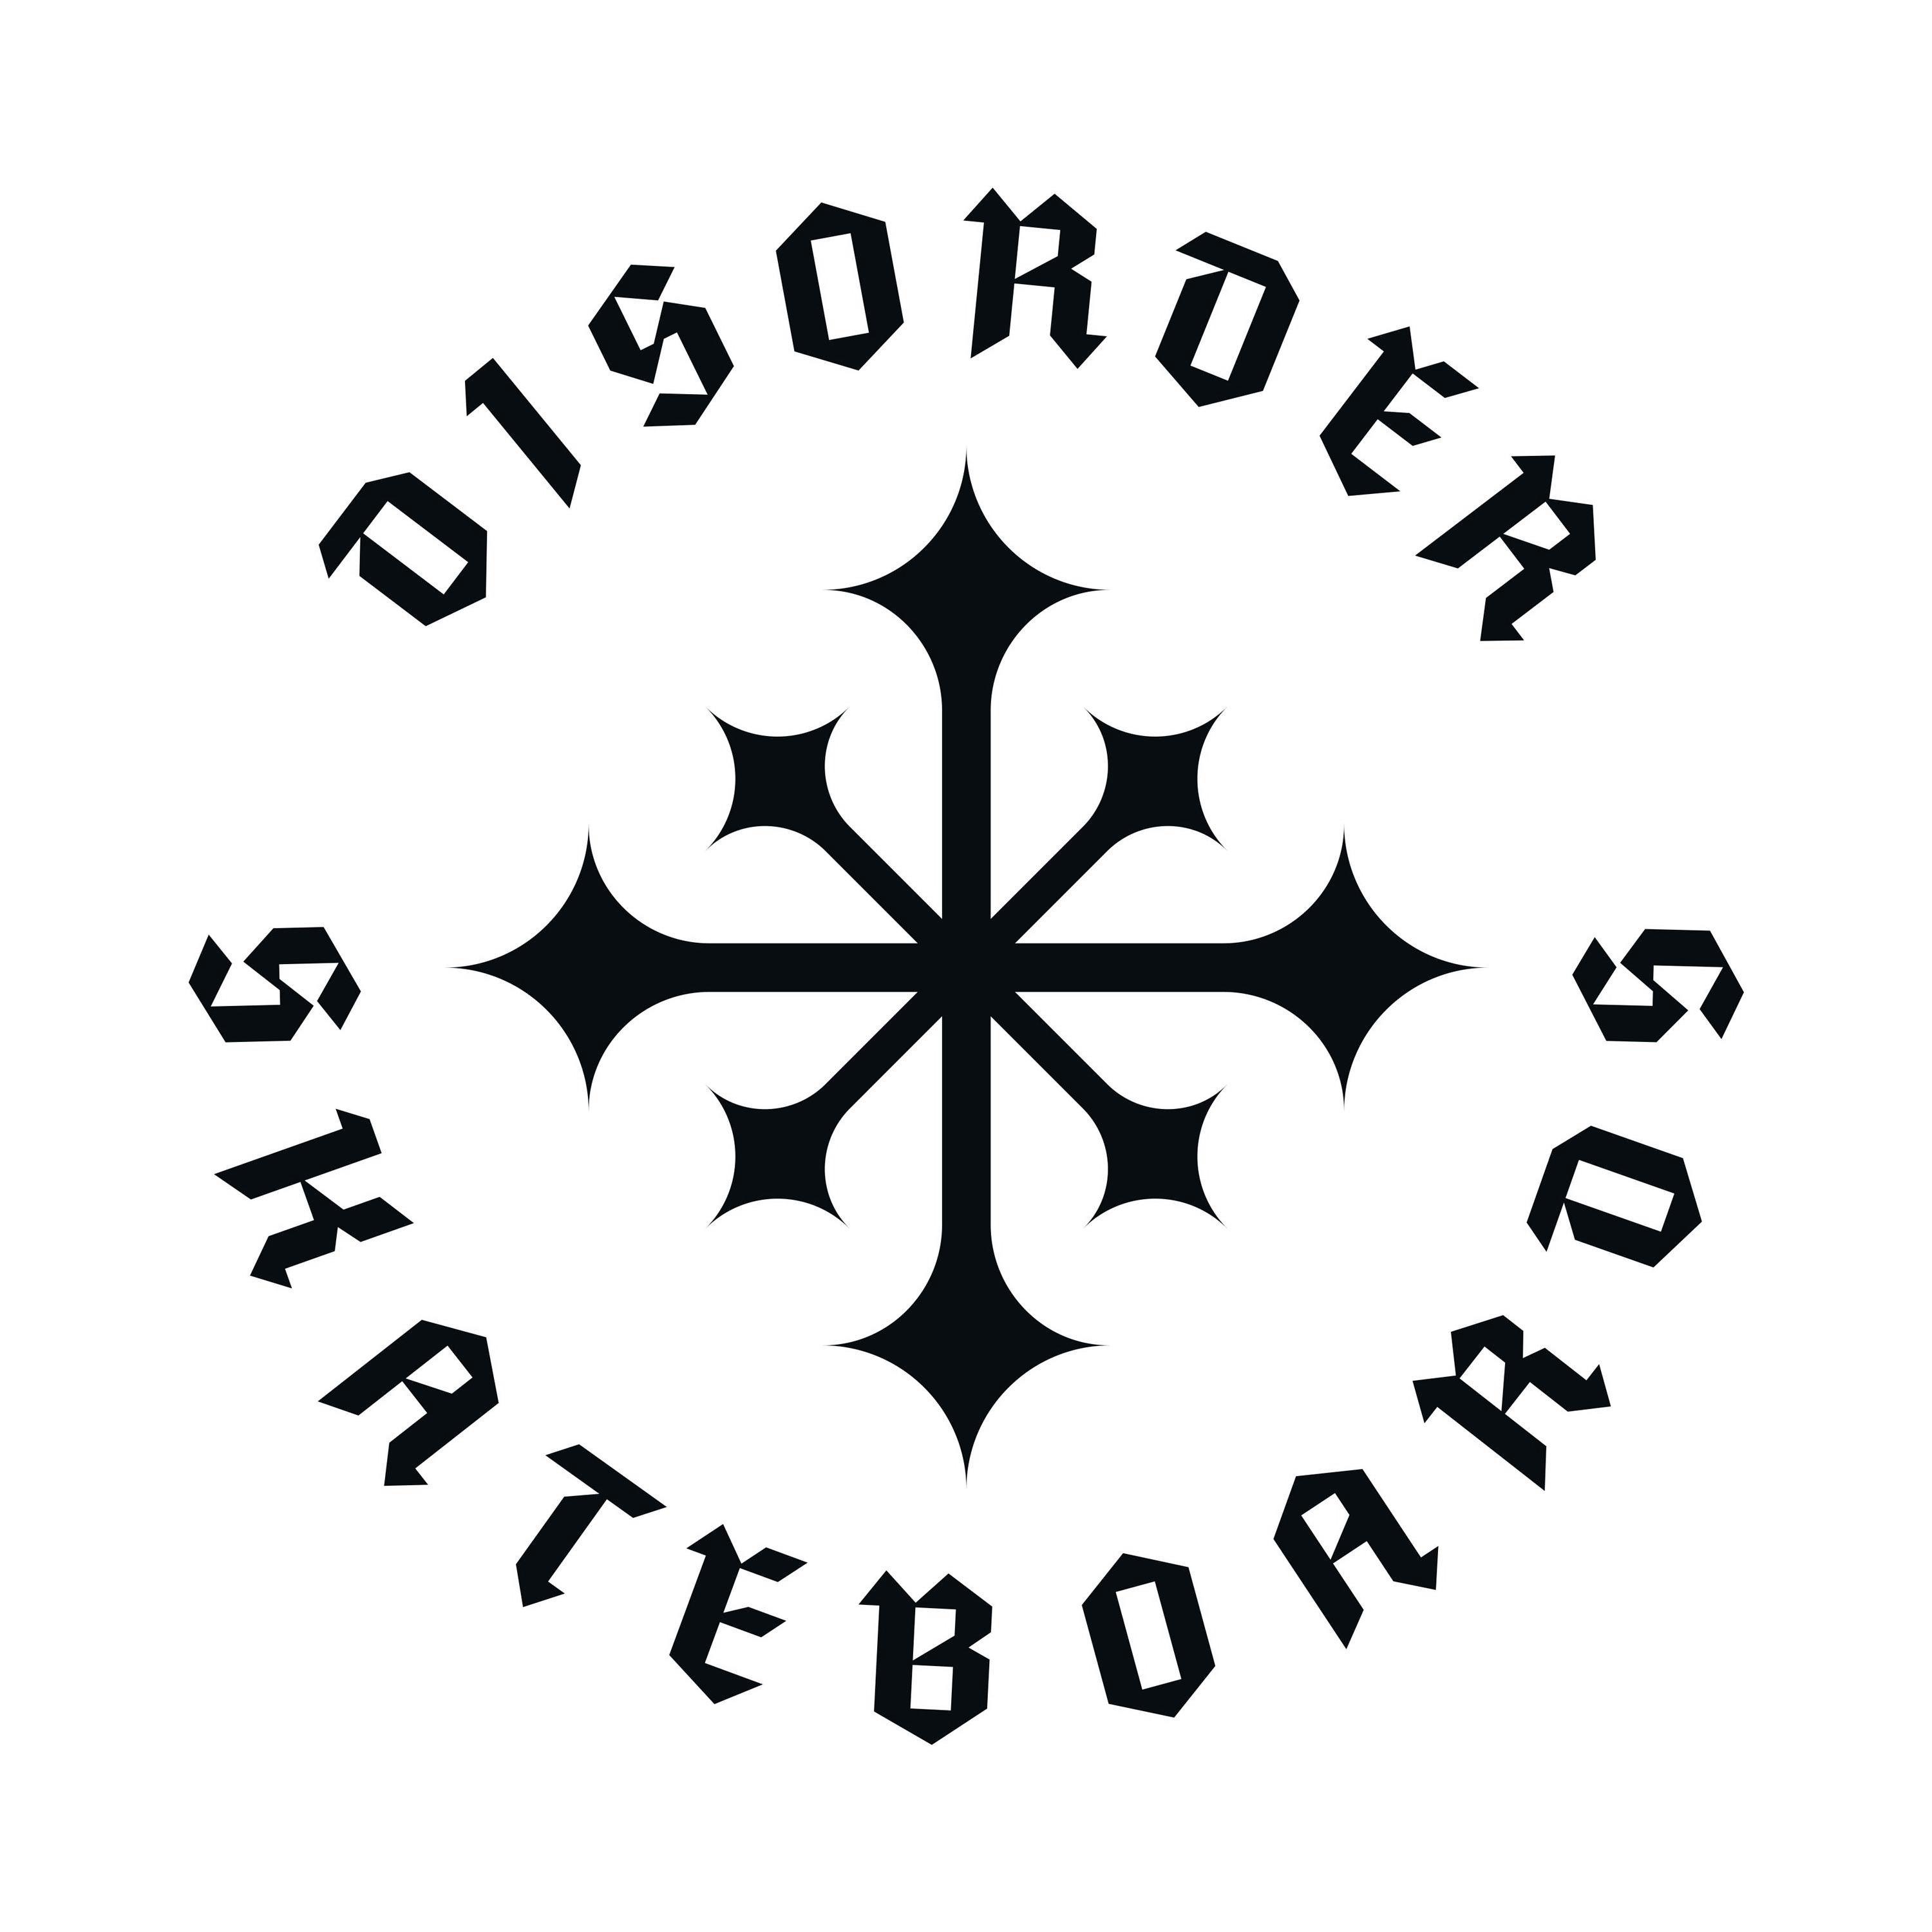 See Skateboard products from Disorder Skateboards